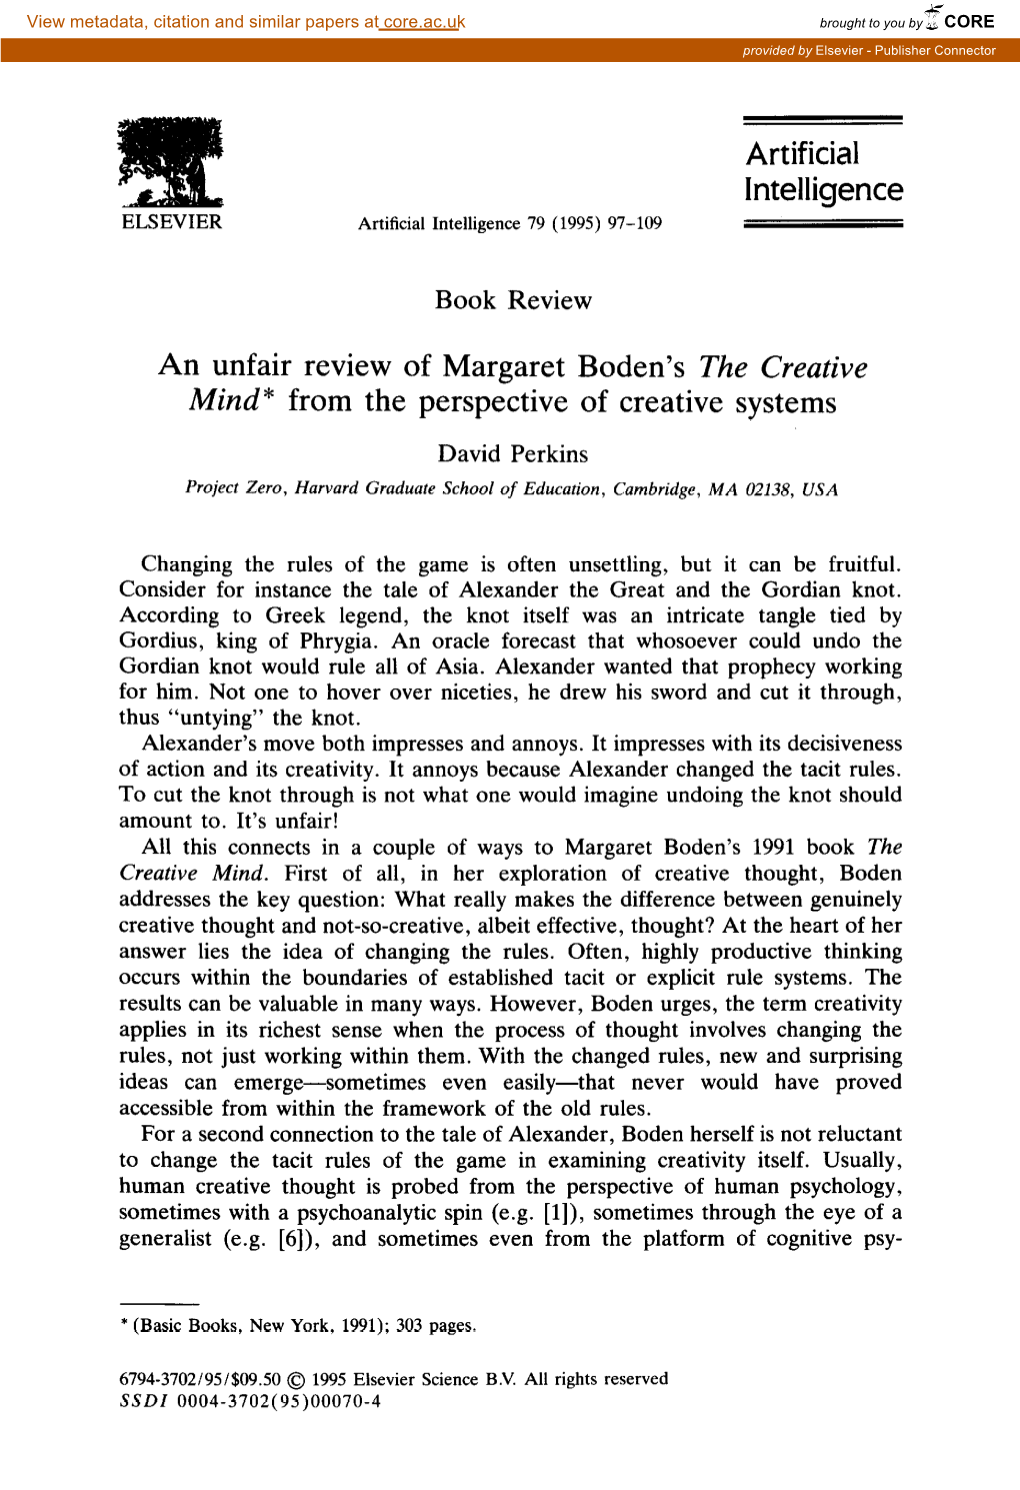 Artificial Intelligence an Unfair Review of Margaret Boden's the Creative